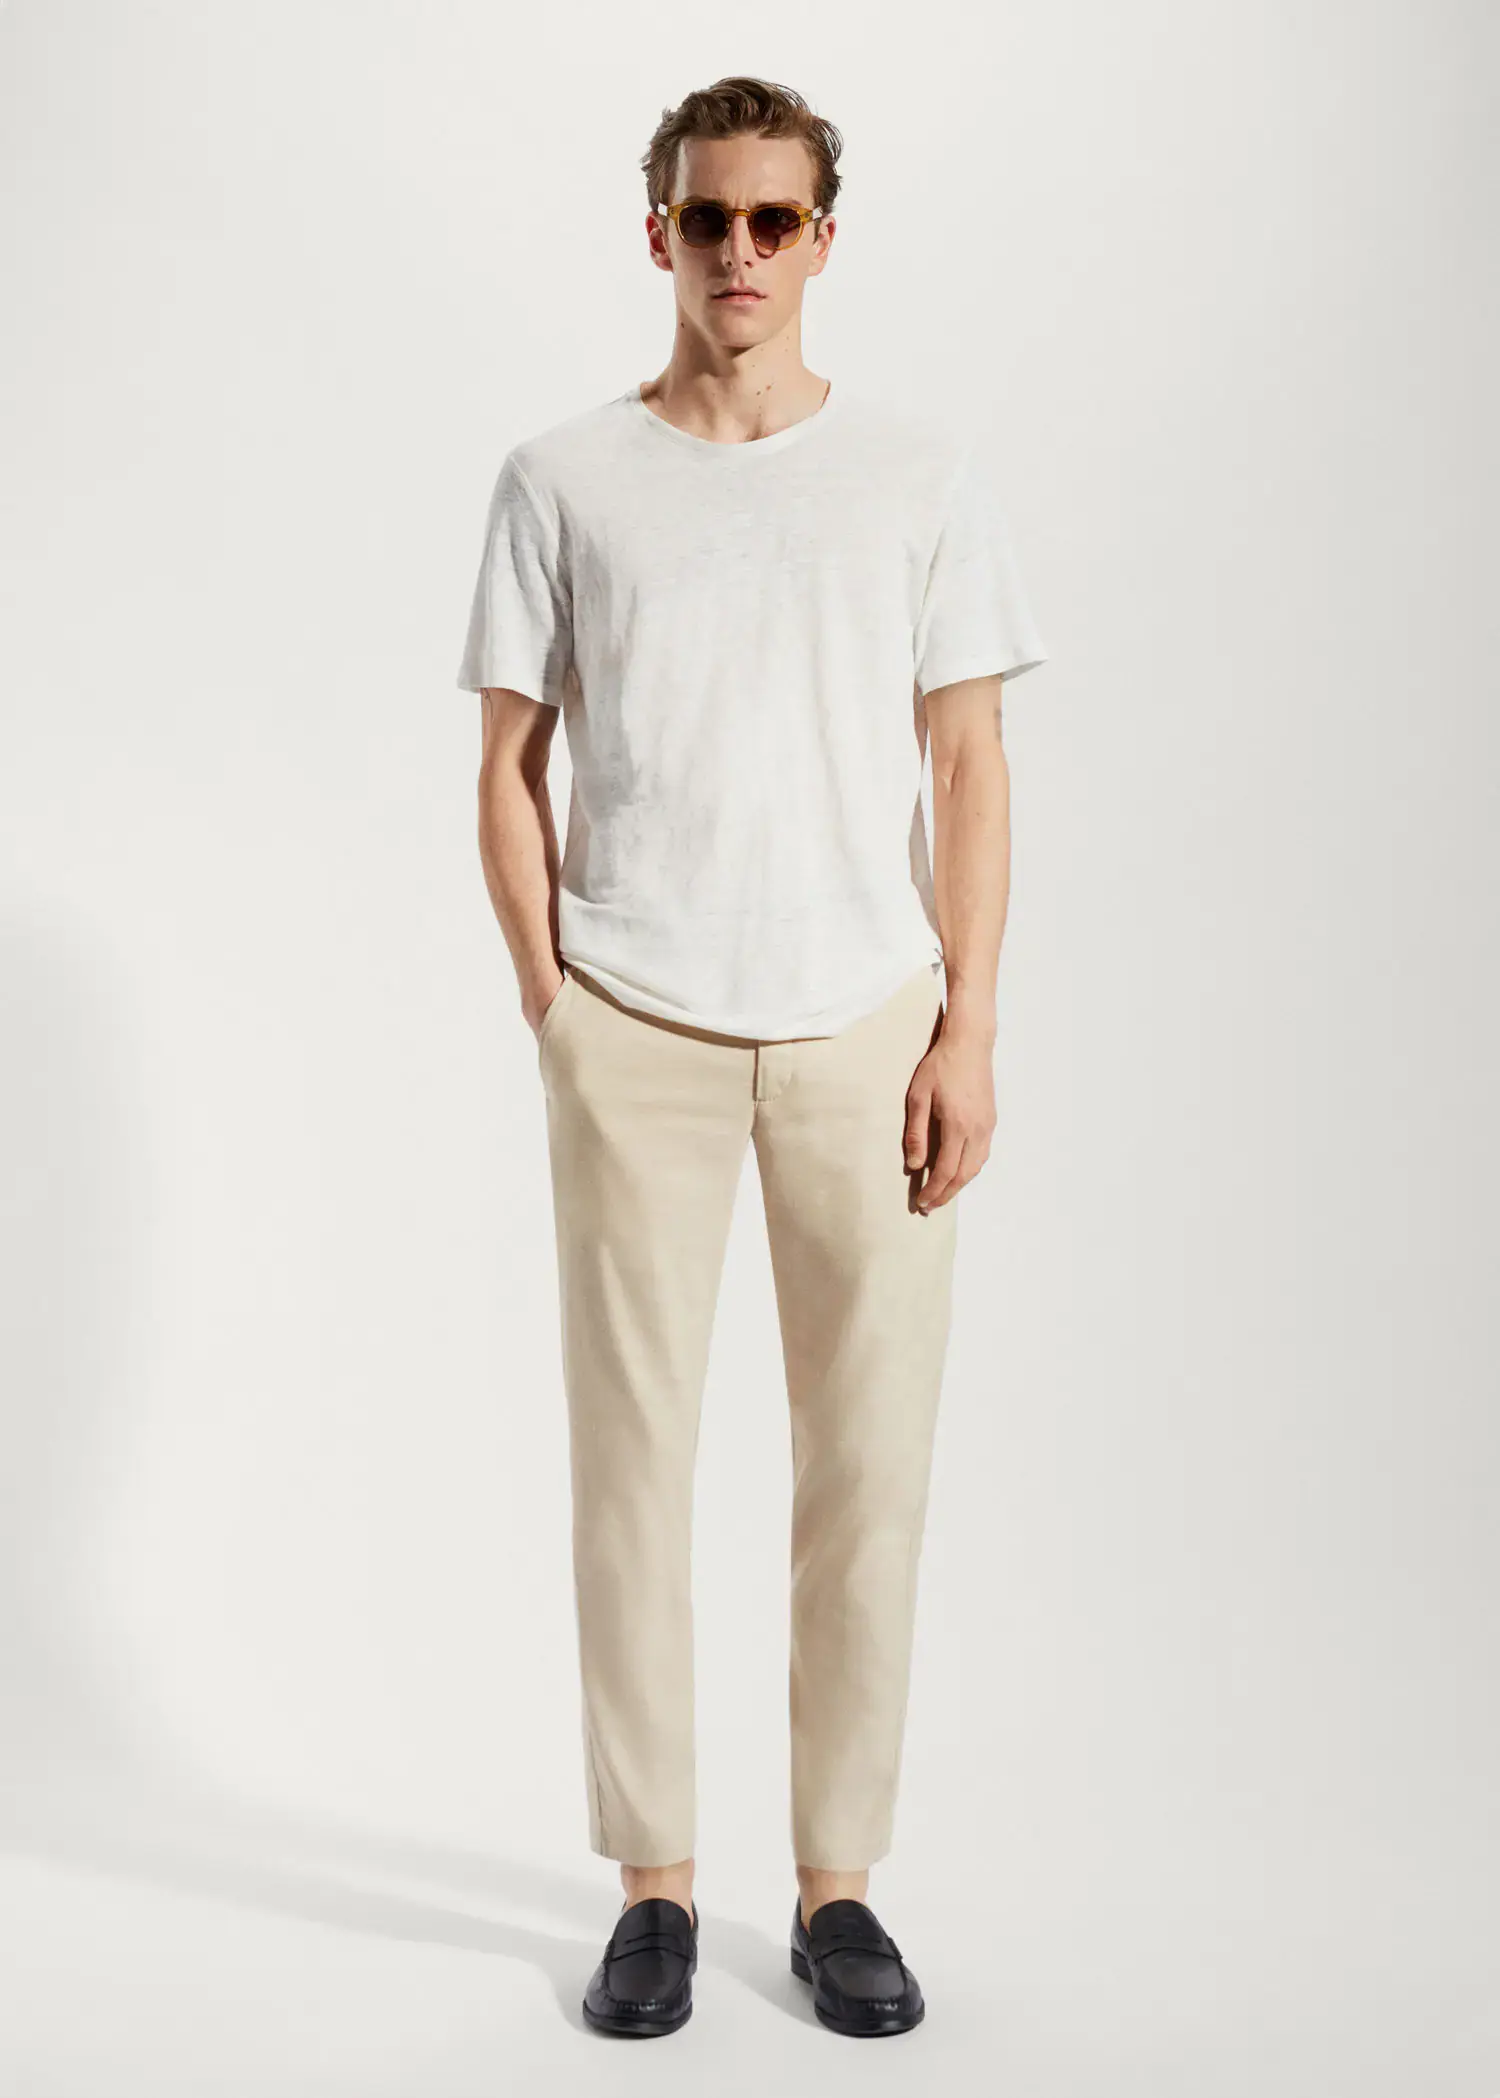 Mango Linen slim-fit pants with inner drawstring. a man in a white t-shirt is standing with his hands in his pockets 